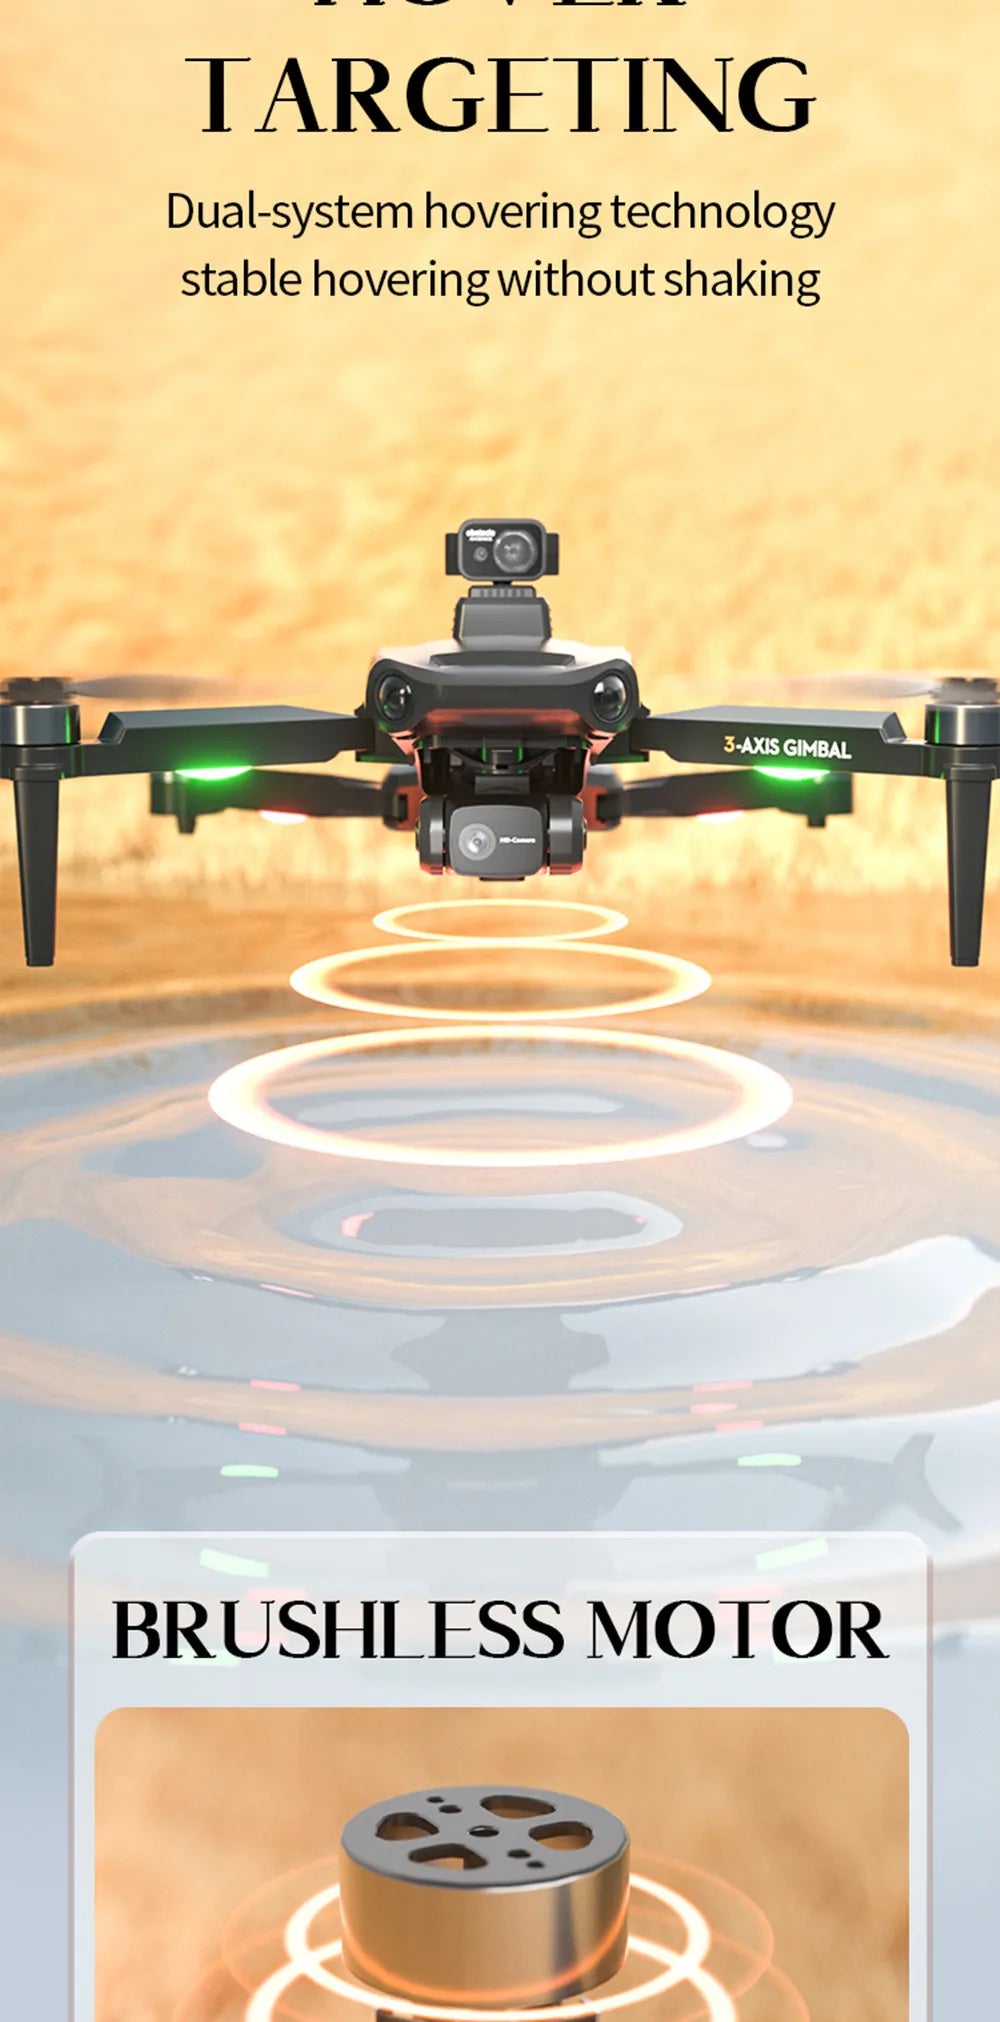 X38 PRO Drone, TARGETING Dual-system hovering technology stable hoveringwithout shaking 3-AXIS